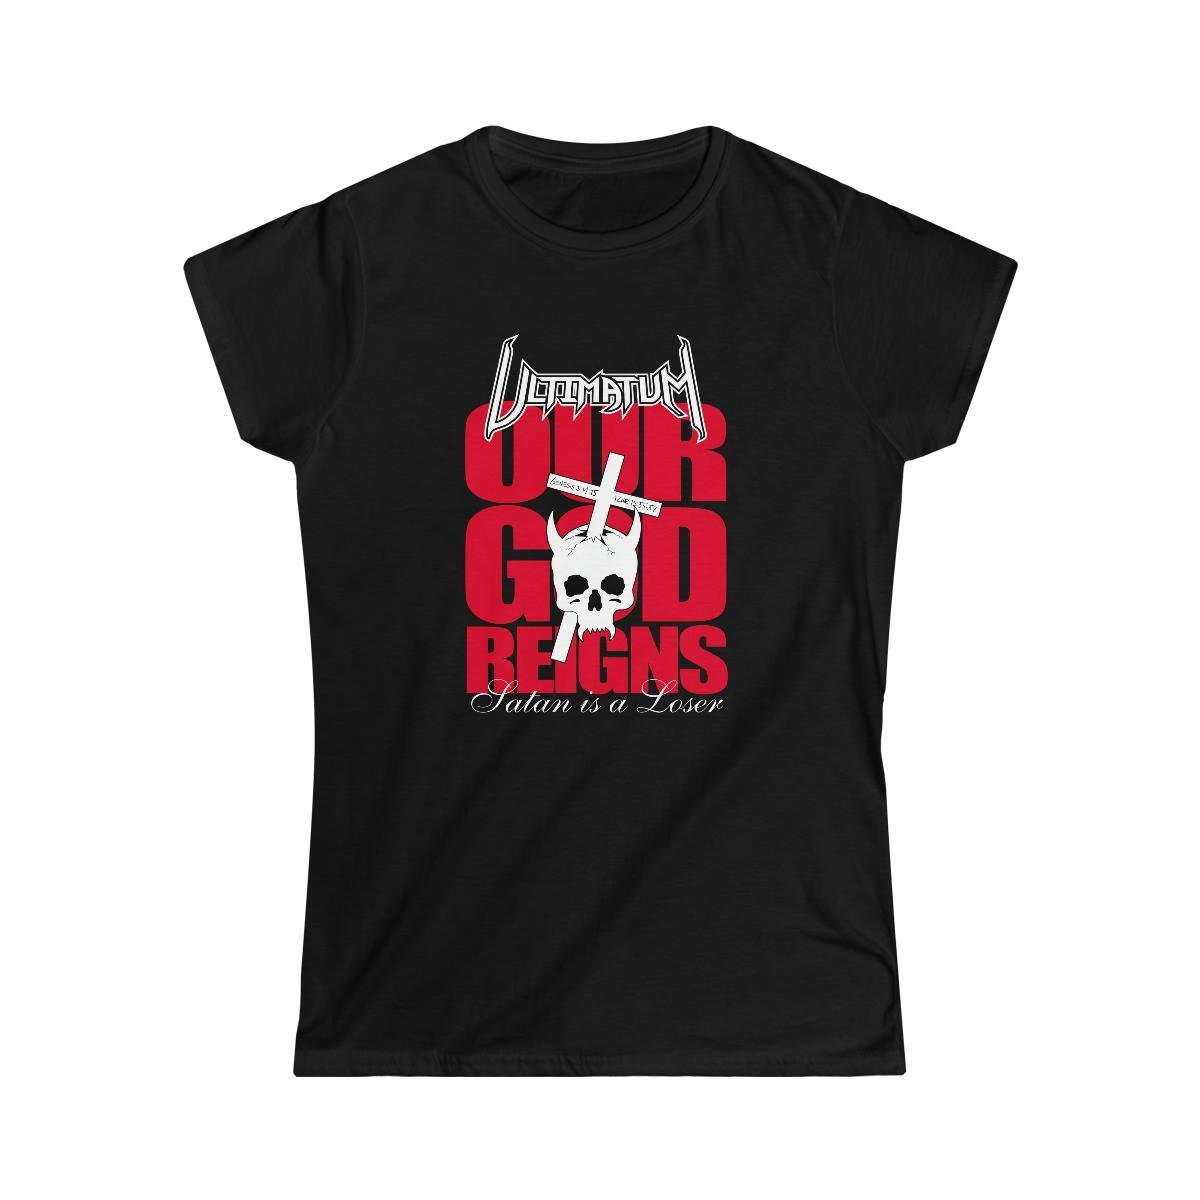 Ultimatum Our God Reigns Women’s Tshirt (2 Sided)